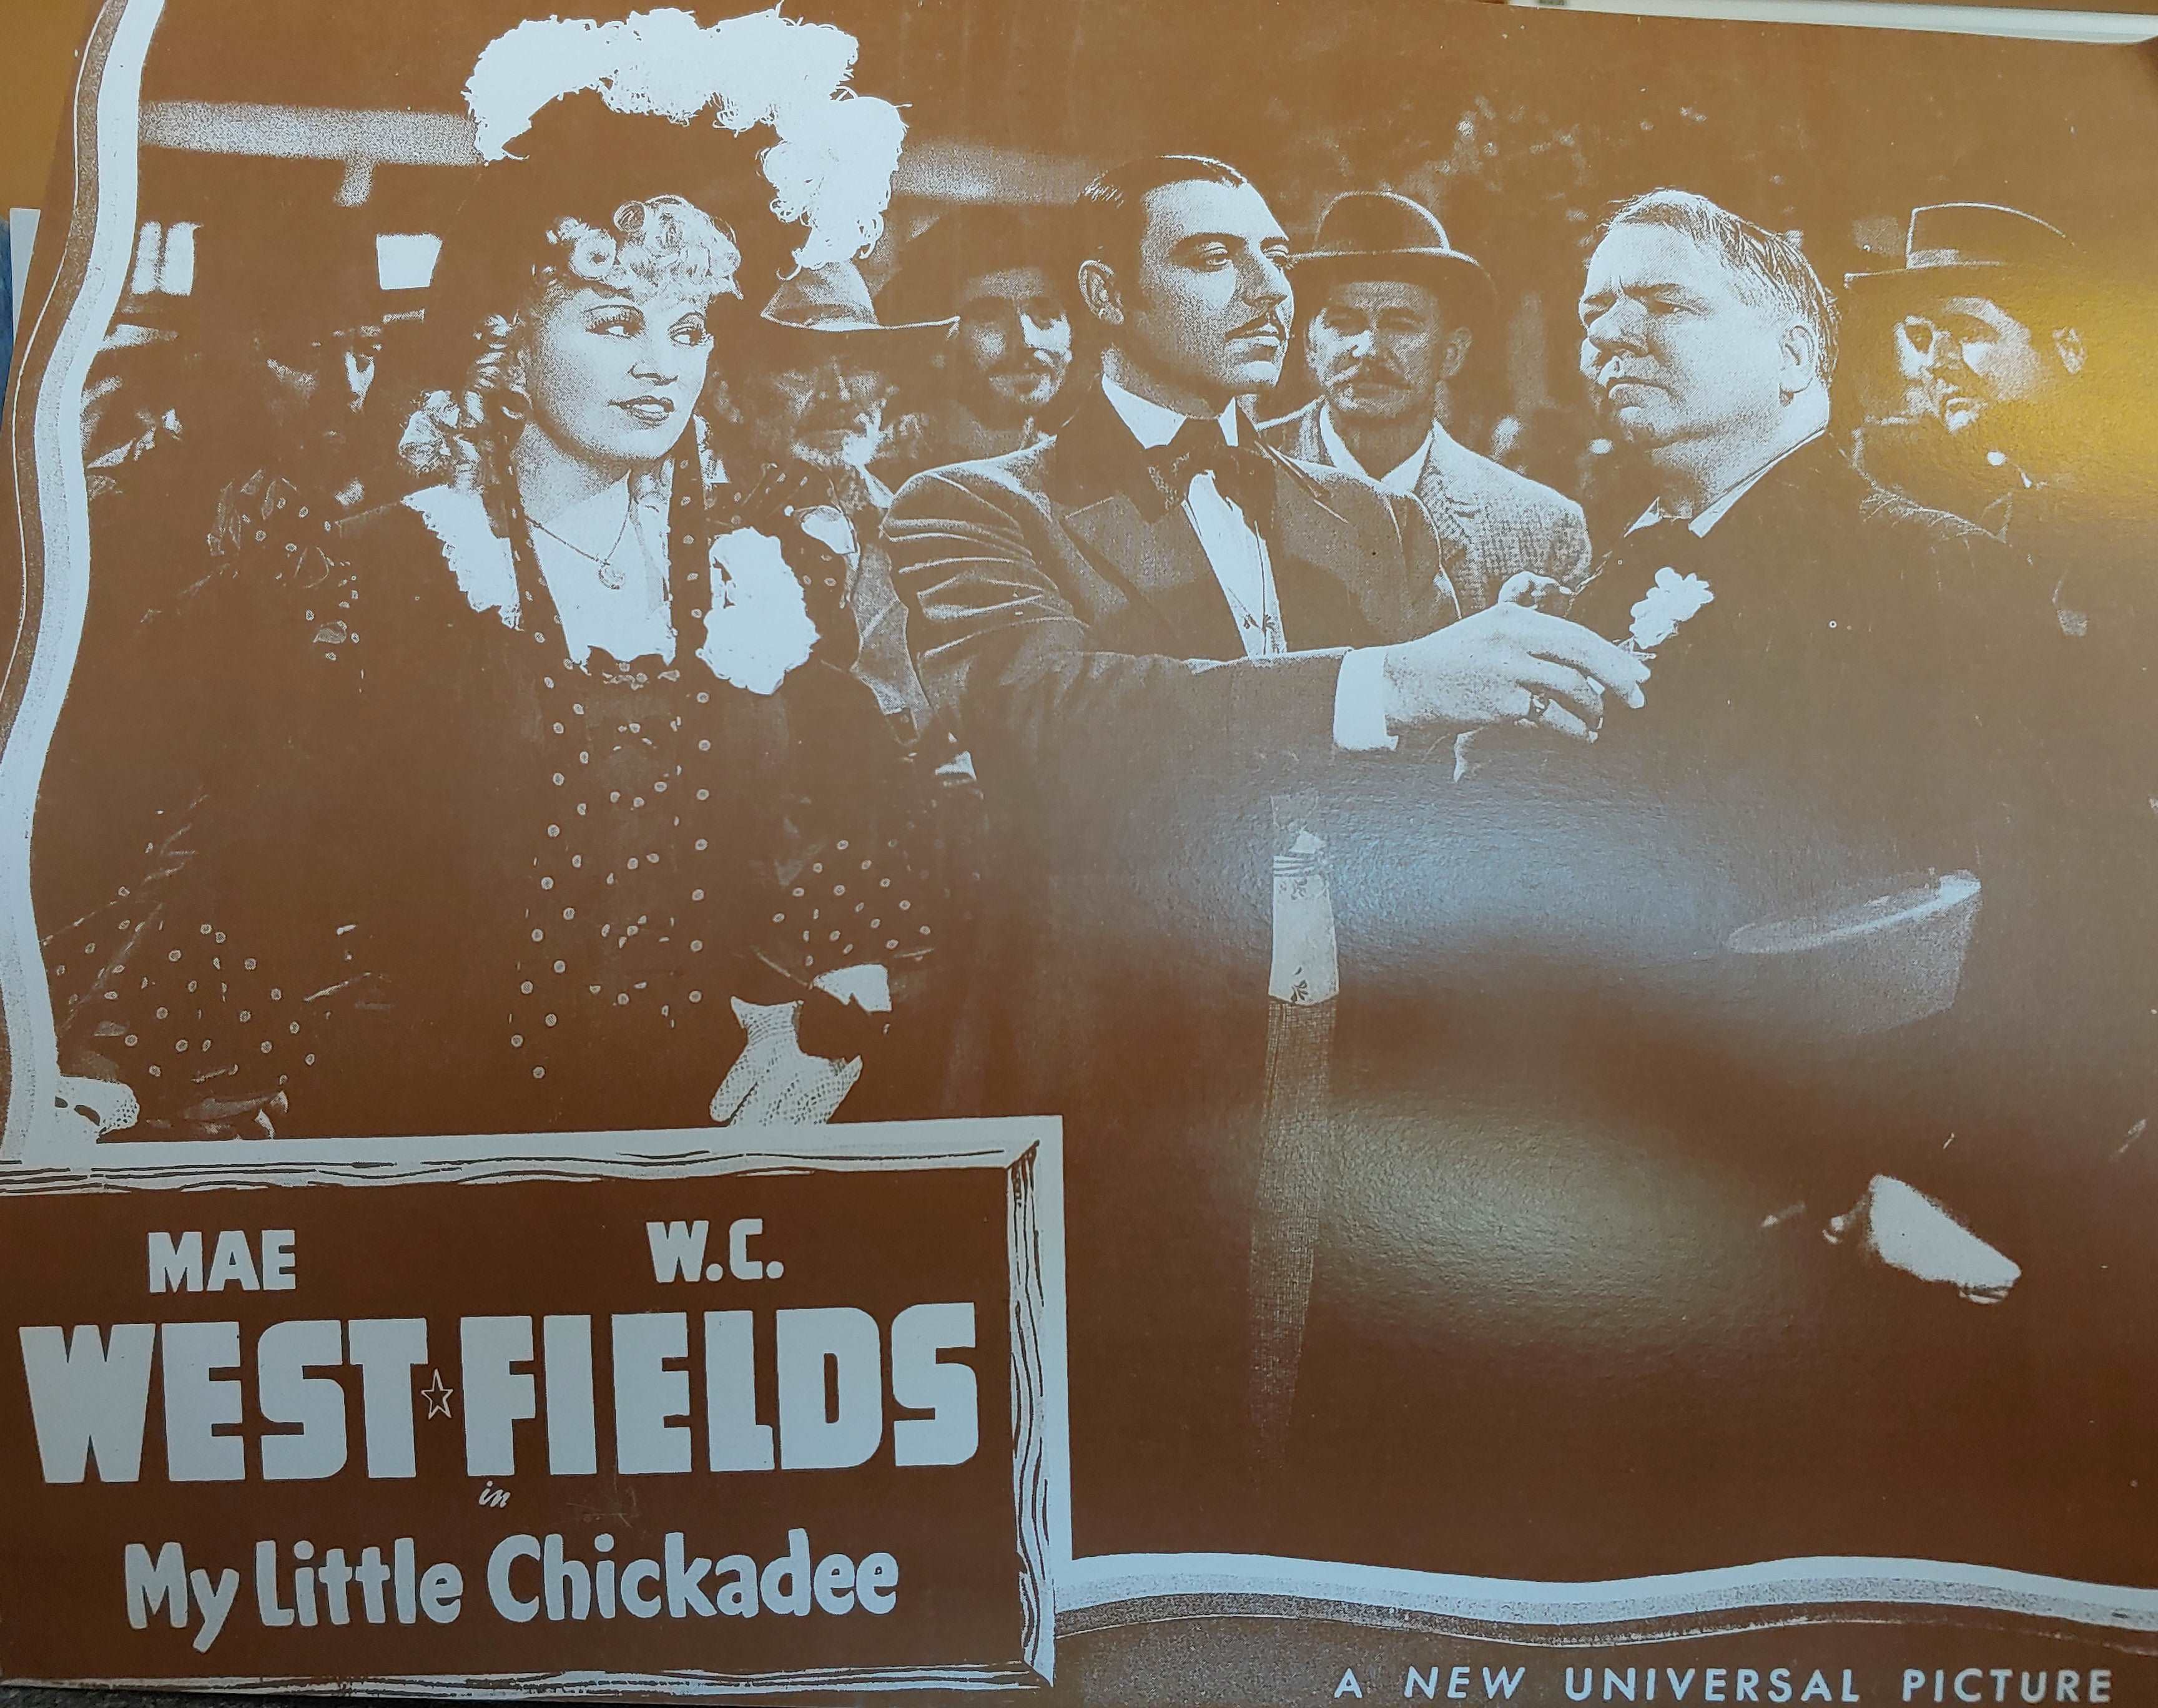 Nostalgic Mae West and WC Fields poster